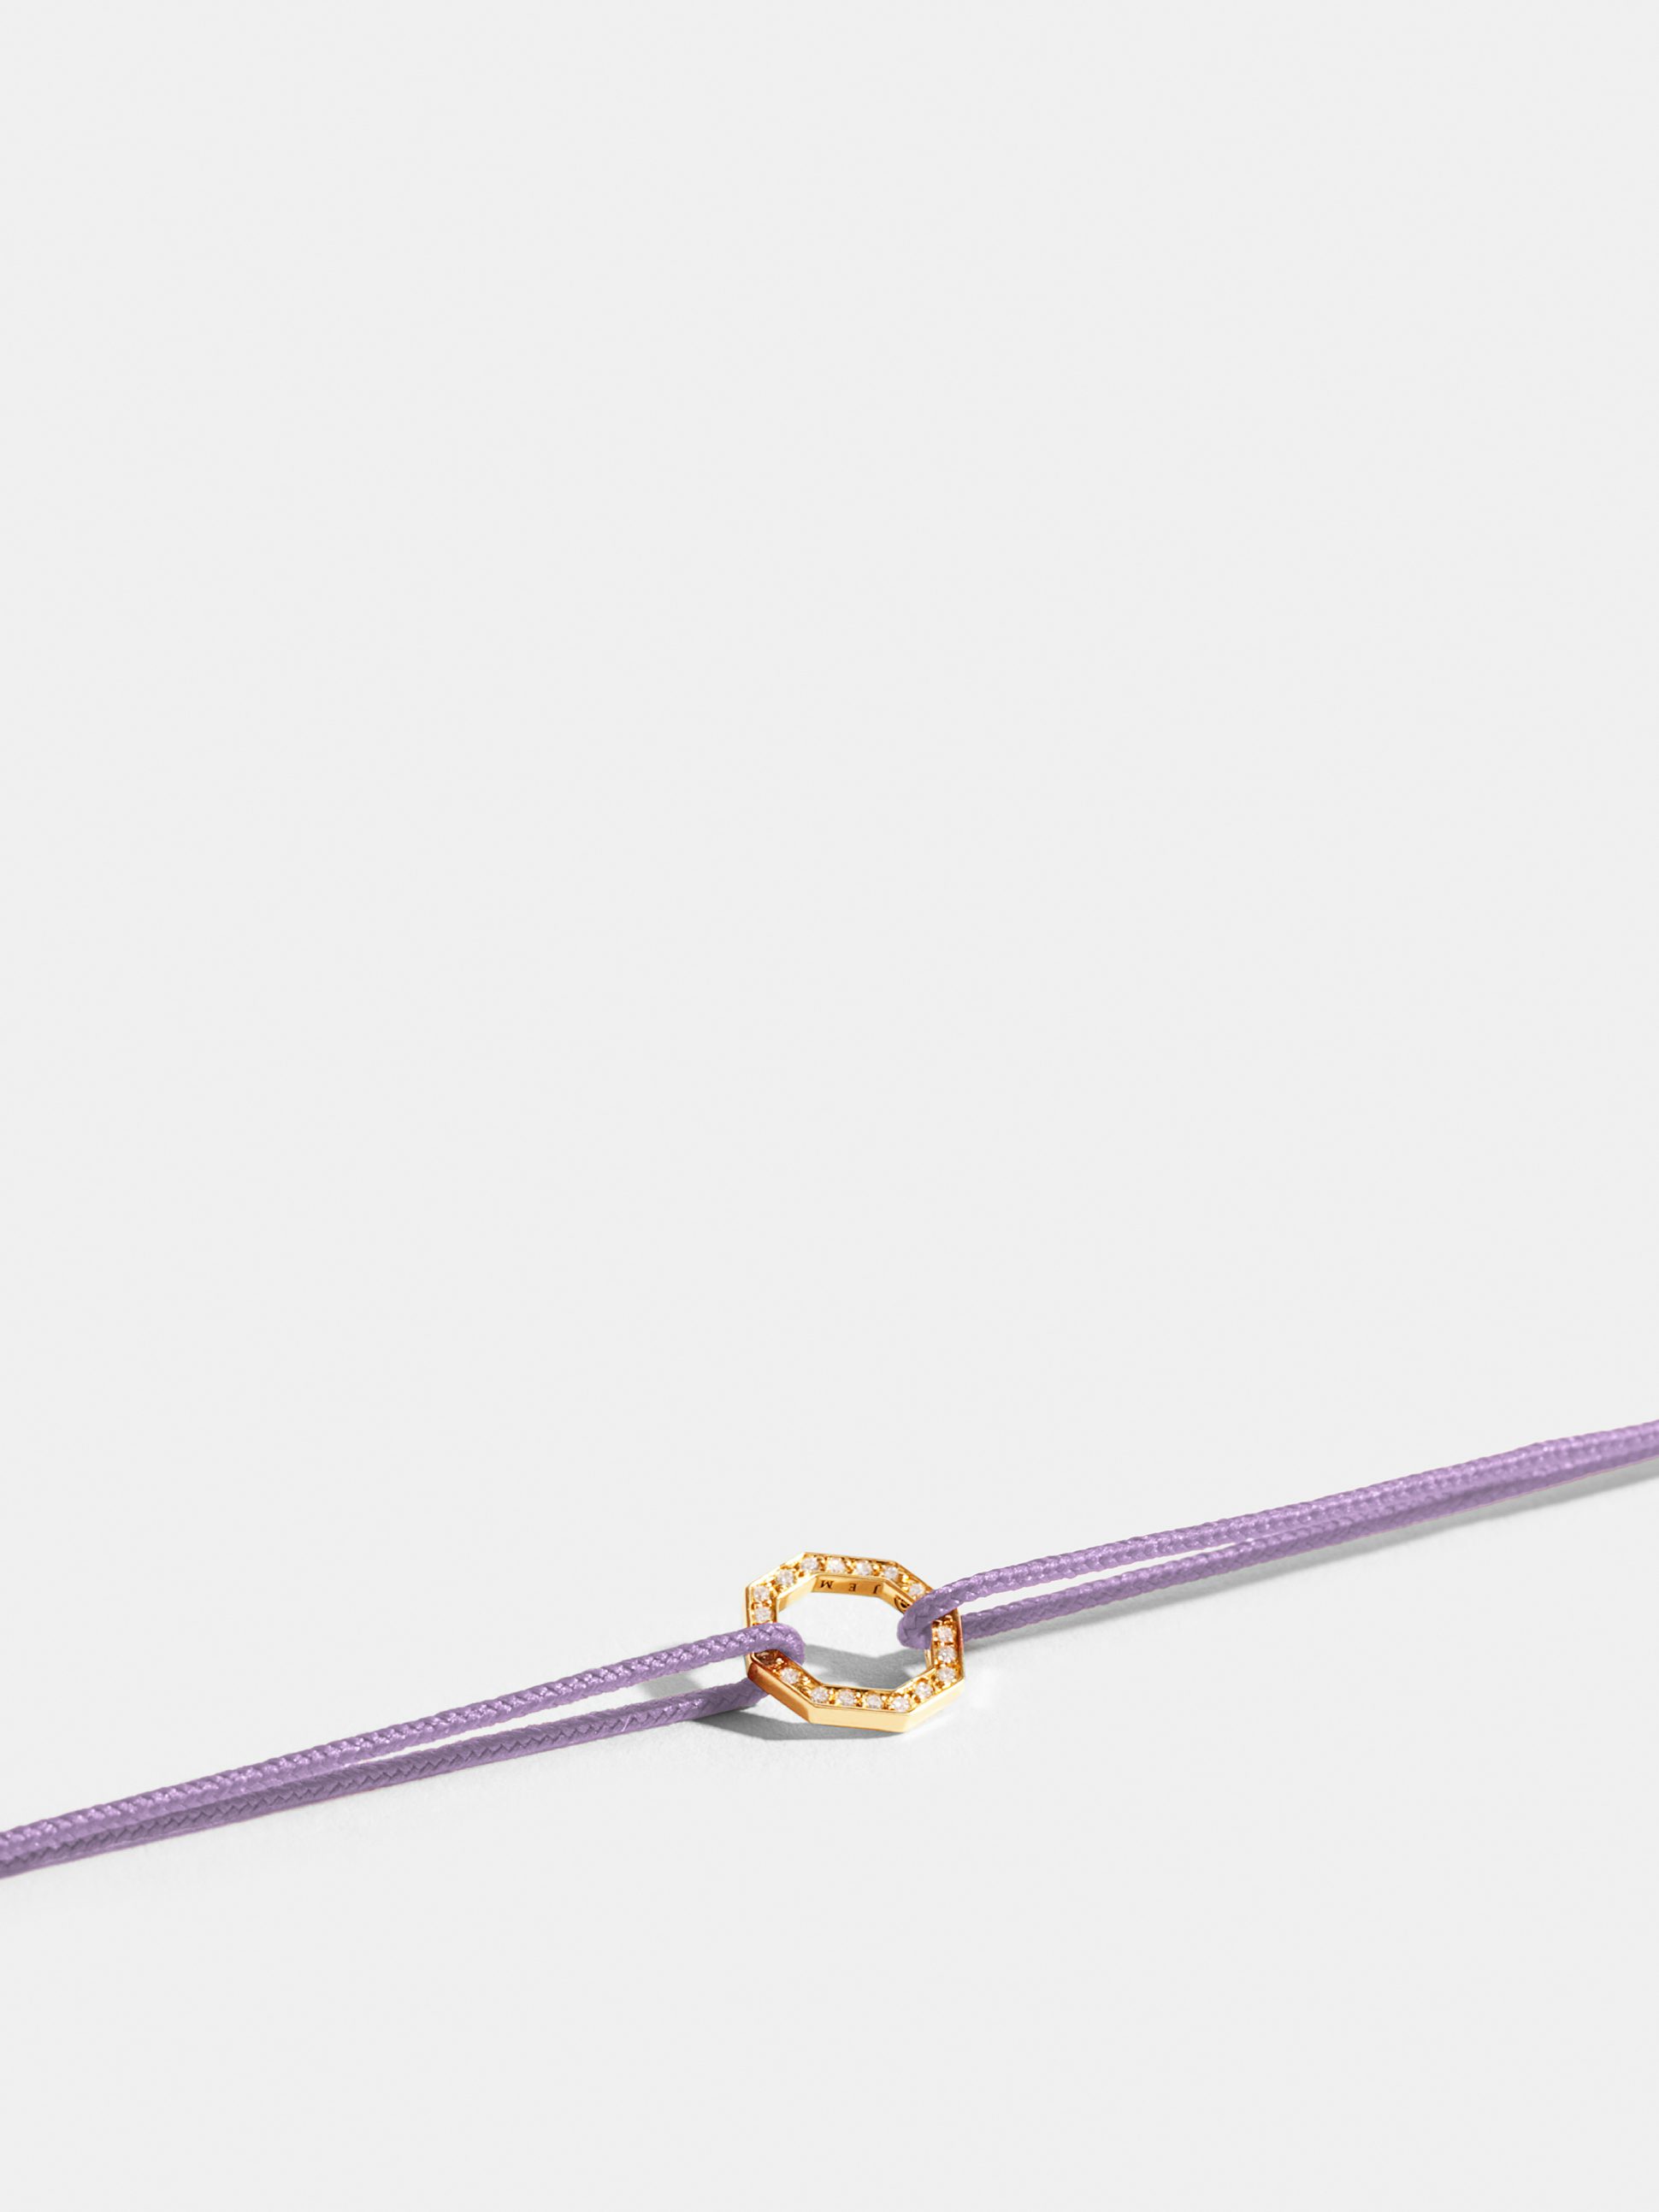 Octogone motif in 18k Fairmined ethical yellow gold, paved with lab-grown diamonds, on a lilac purple cord.